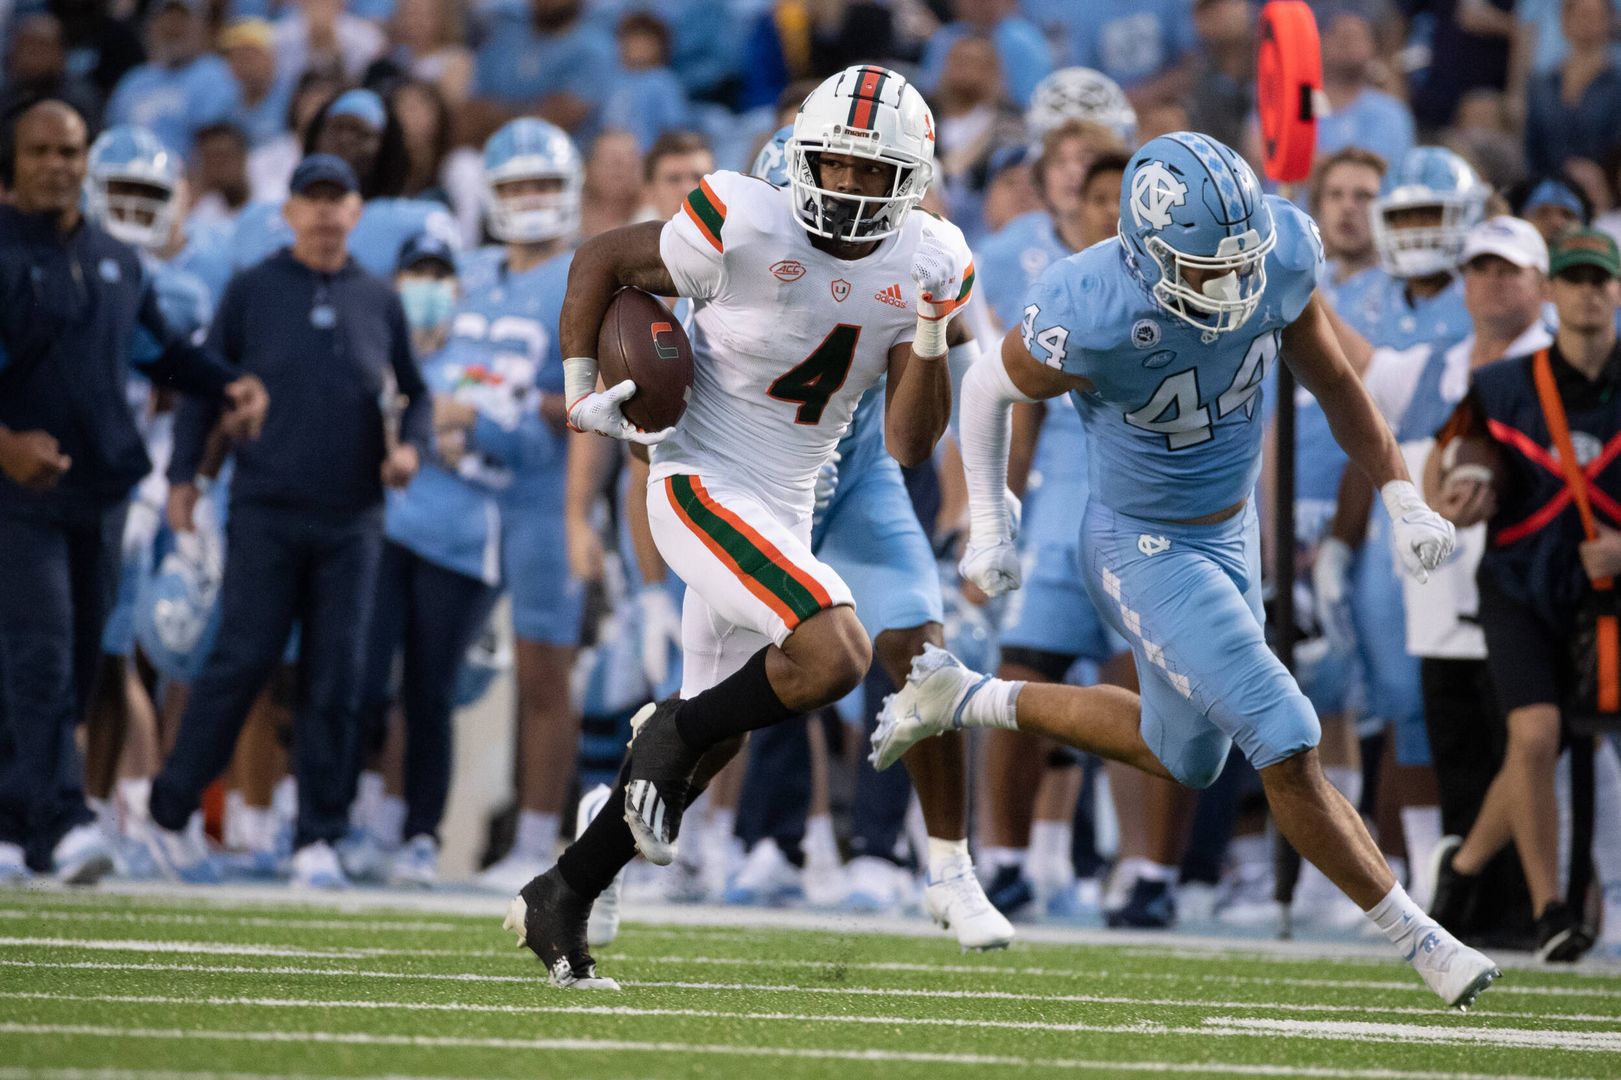 Late Comeback Thwarted in 45-42 Loss to Tar Heels